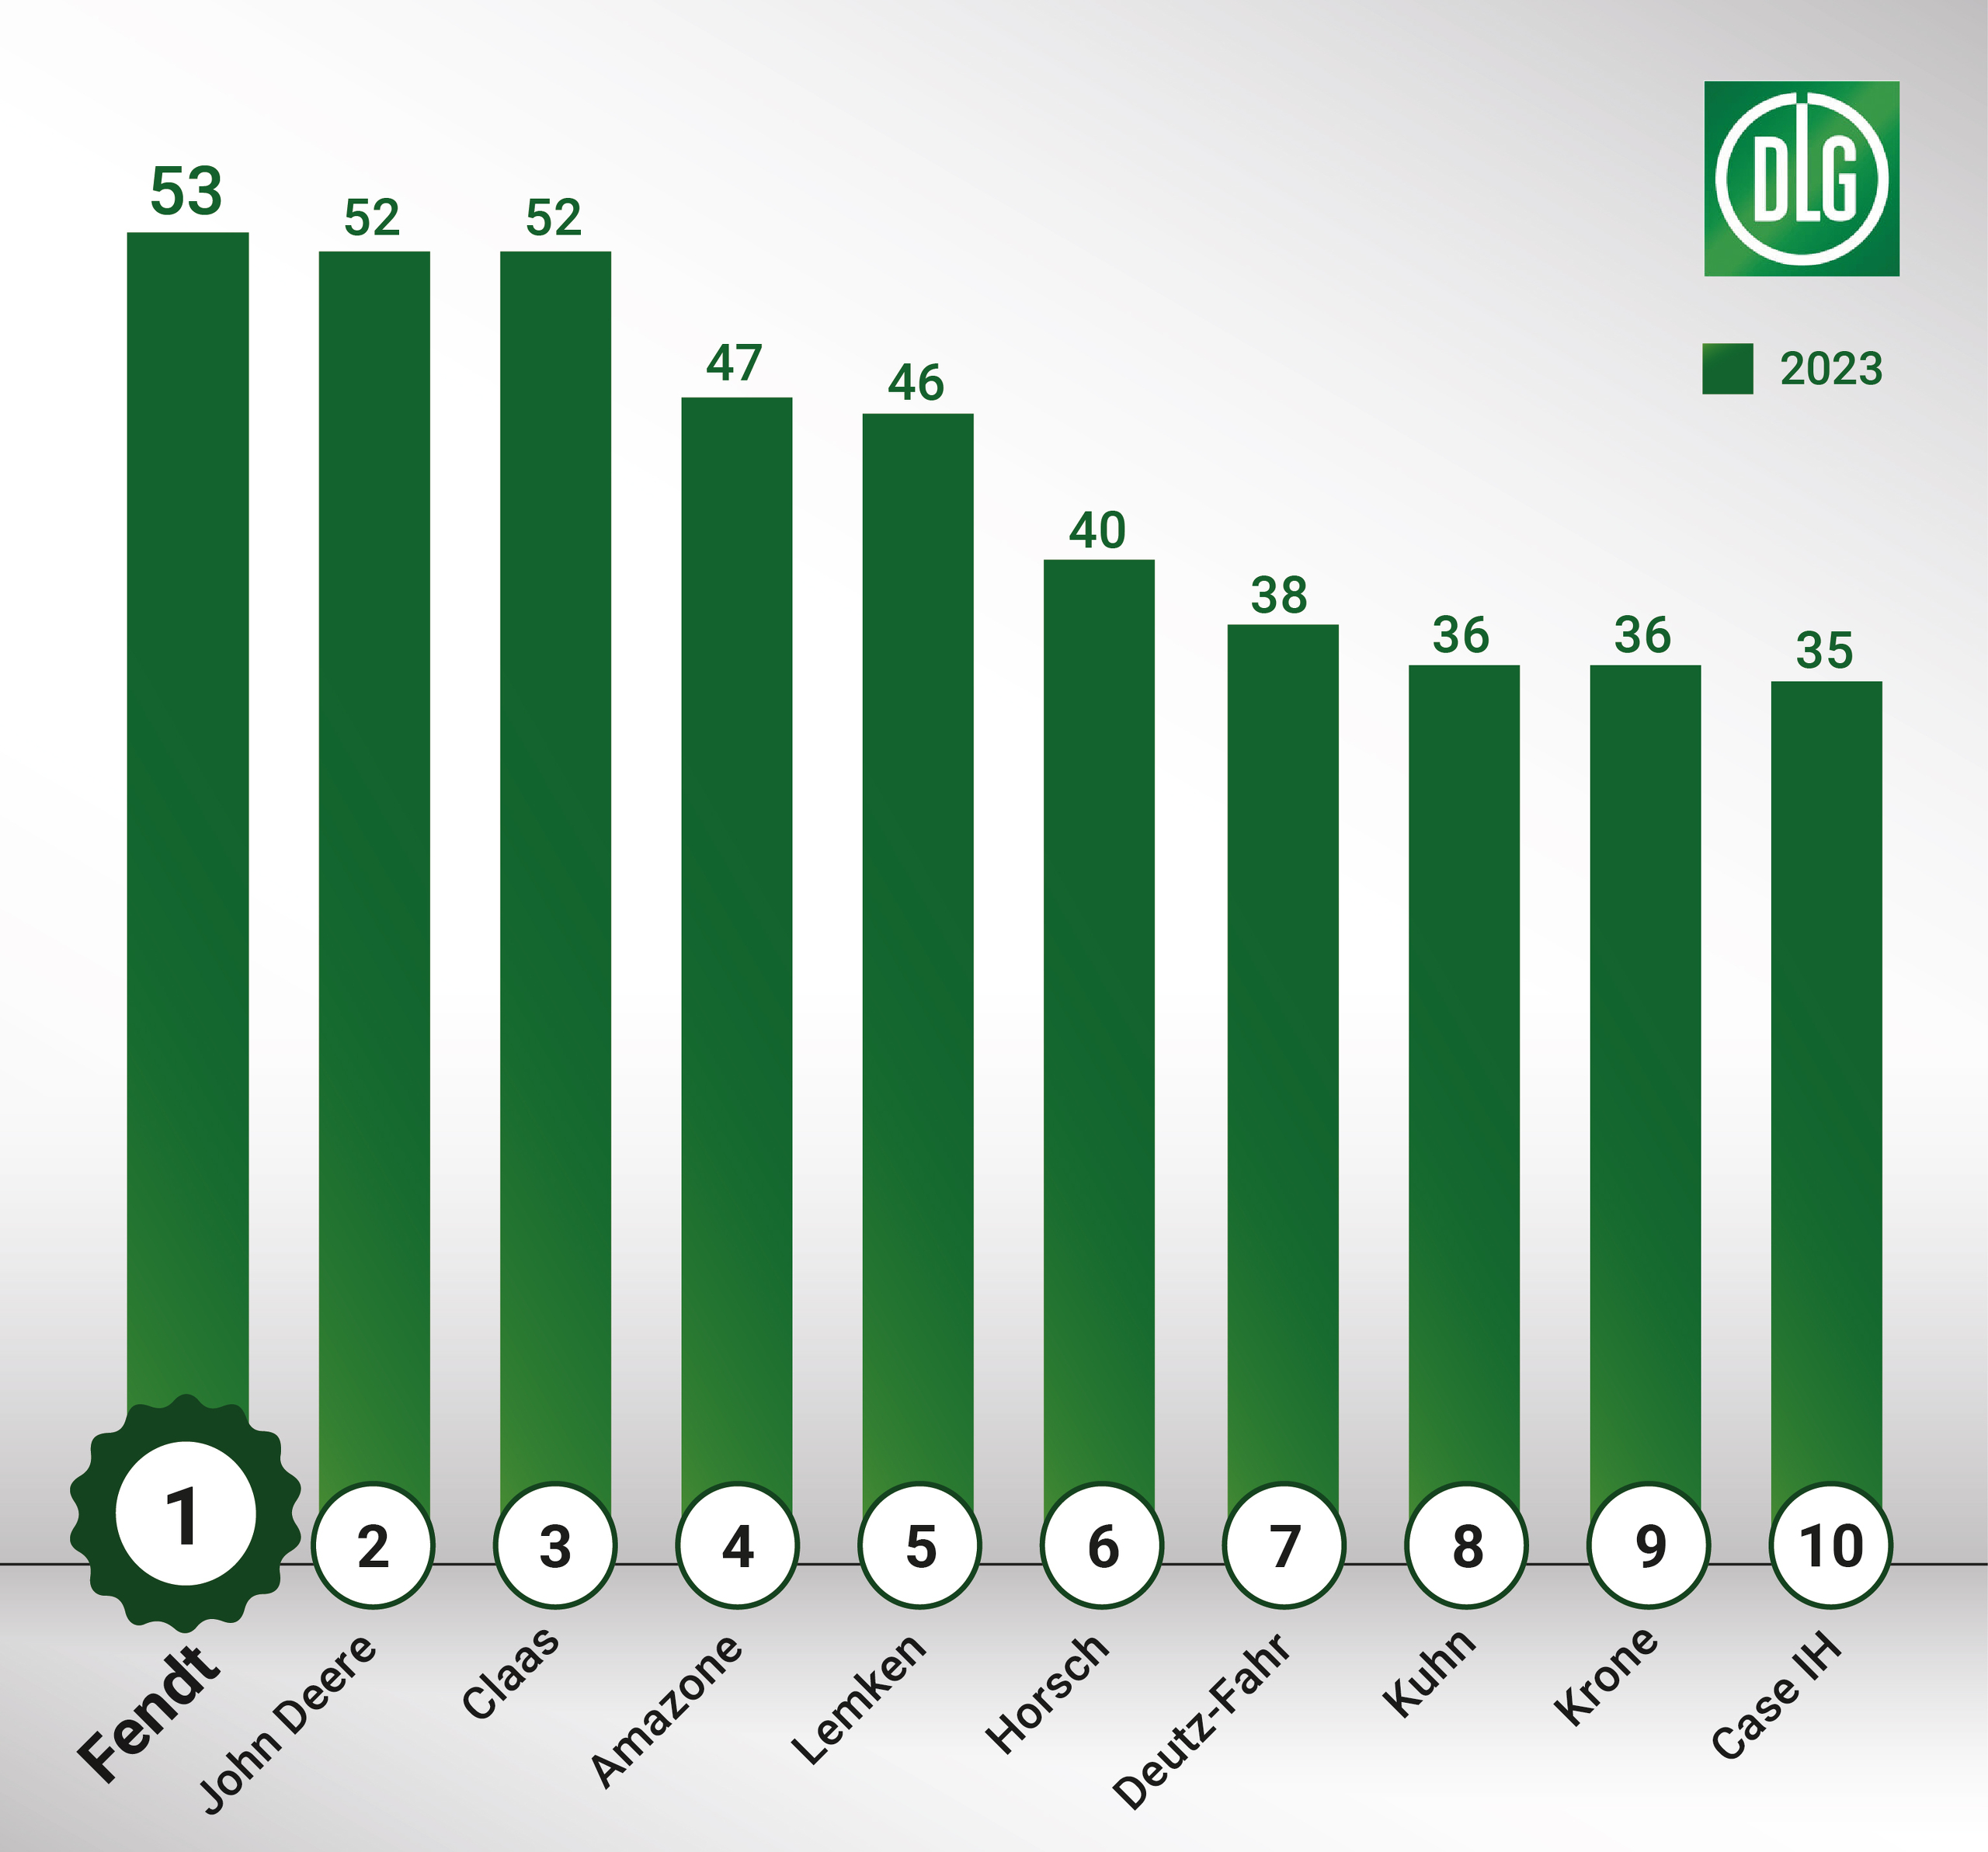 Fendt continues to lead the DLG ImageBarometer 2022/2023